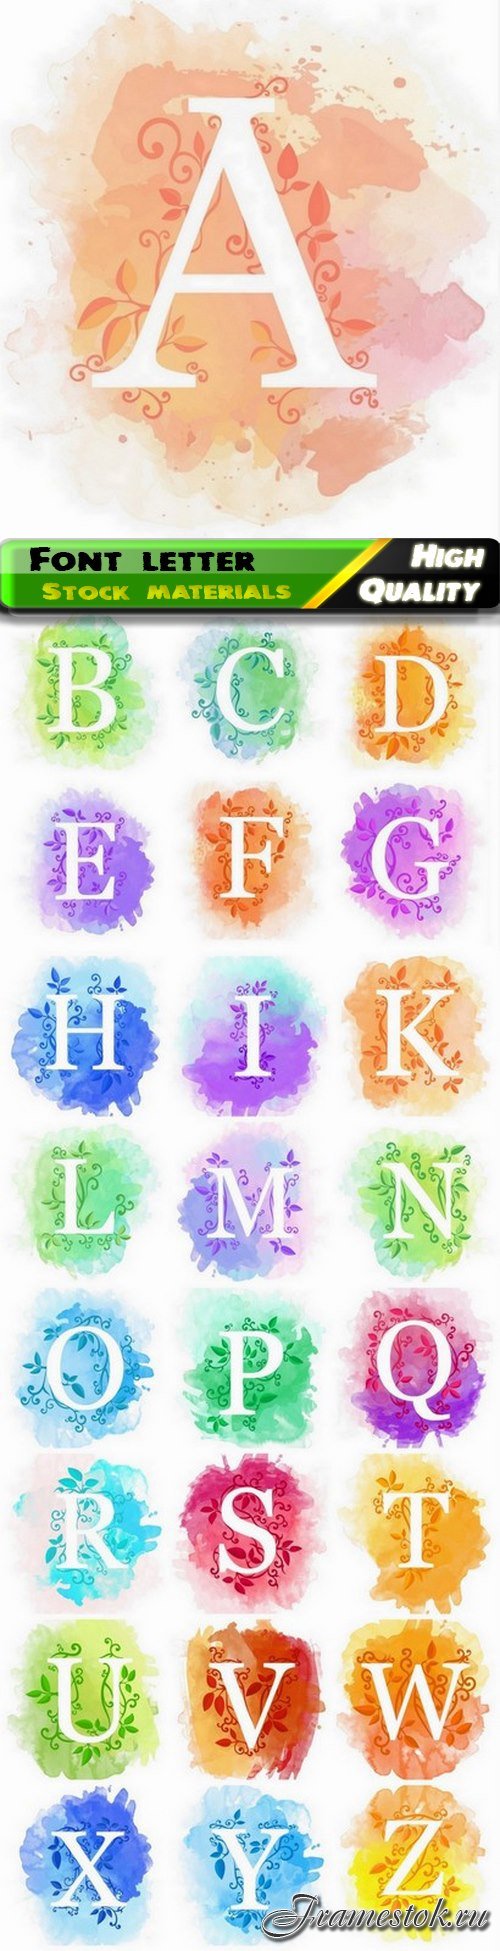 Font and alphabet letter on floral watercolor background 25 HQ Jpg